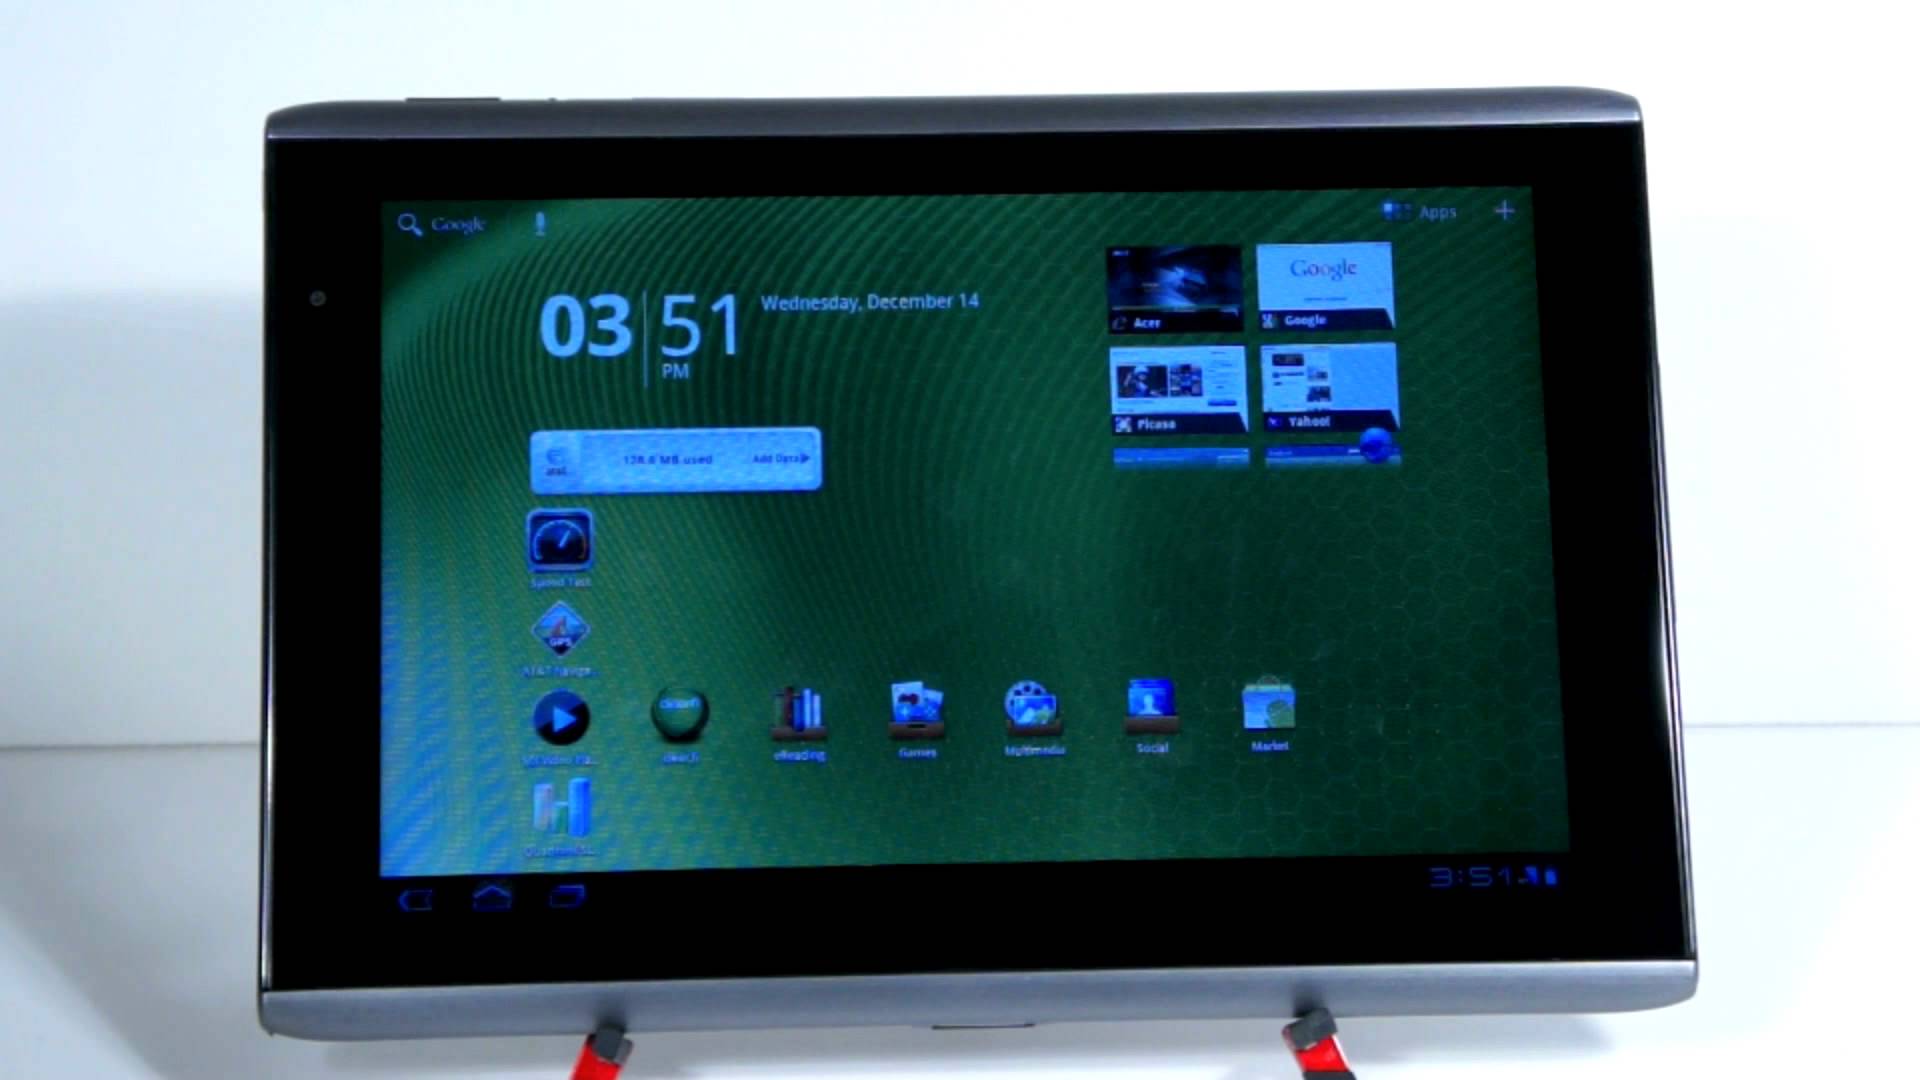 Acer Iconia Tab A501 Stock Firmware and Flashing tools